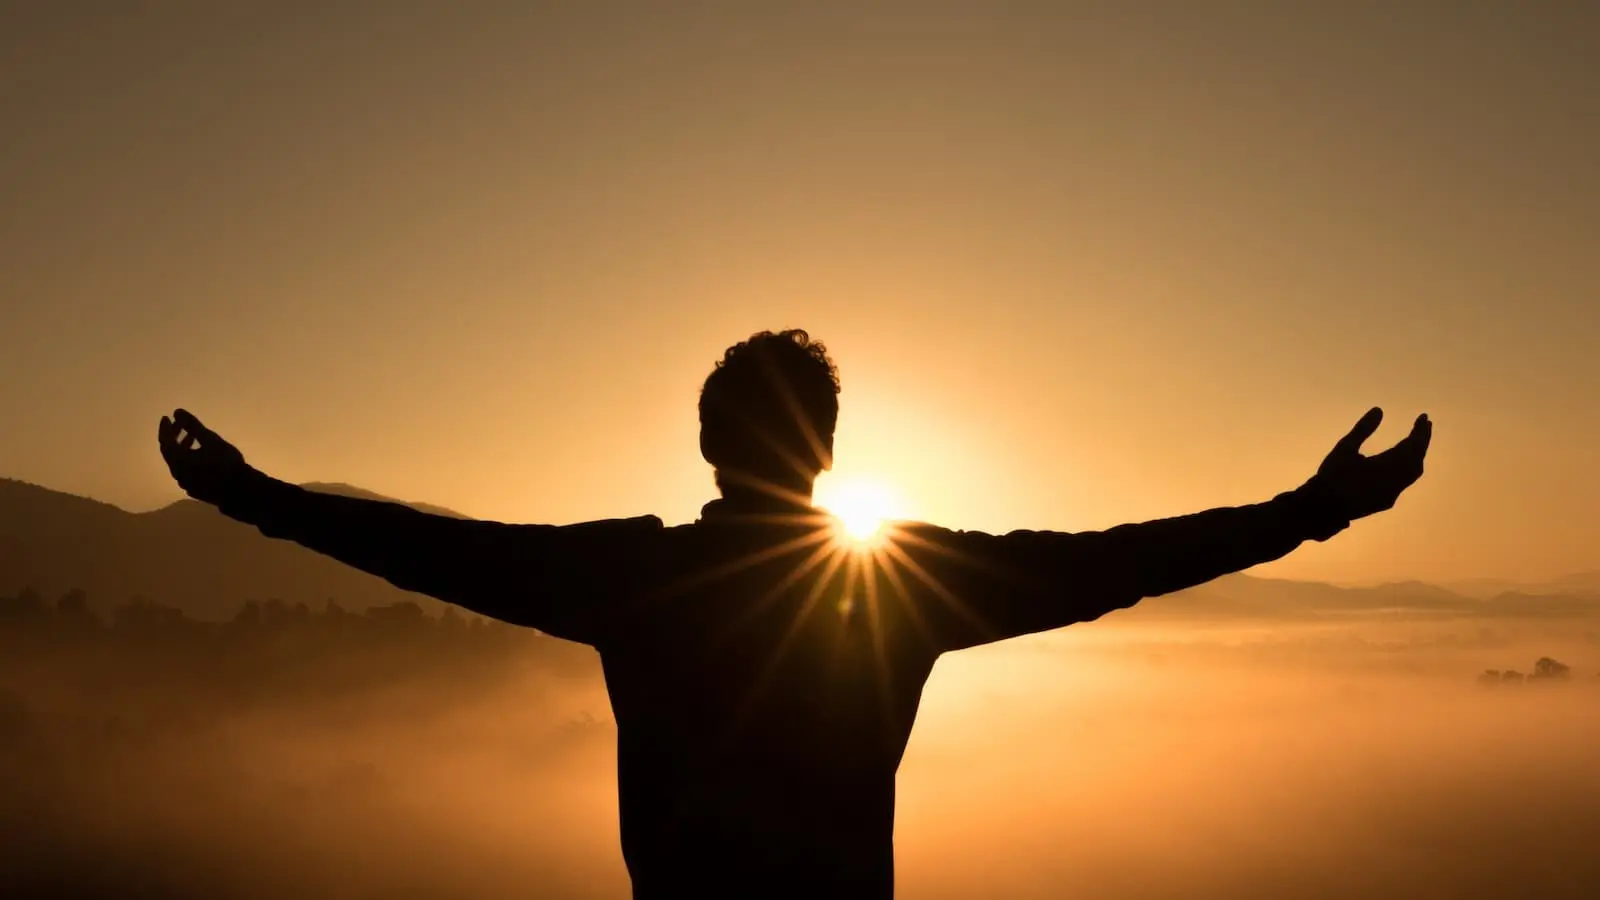 A silhouette of a man with his arms outstretched in front of the sun.